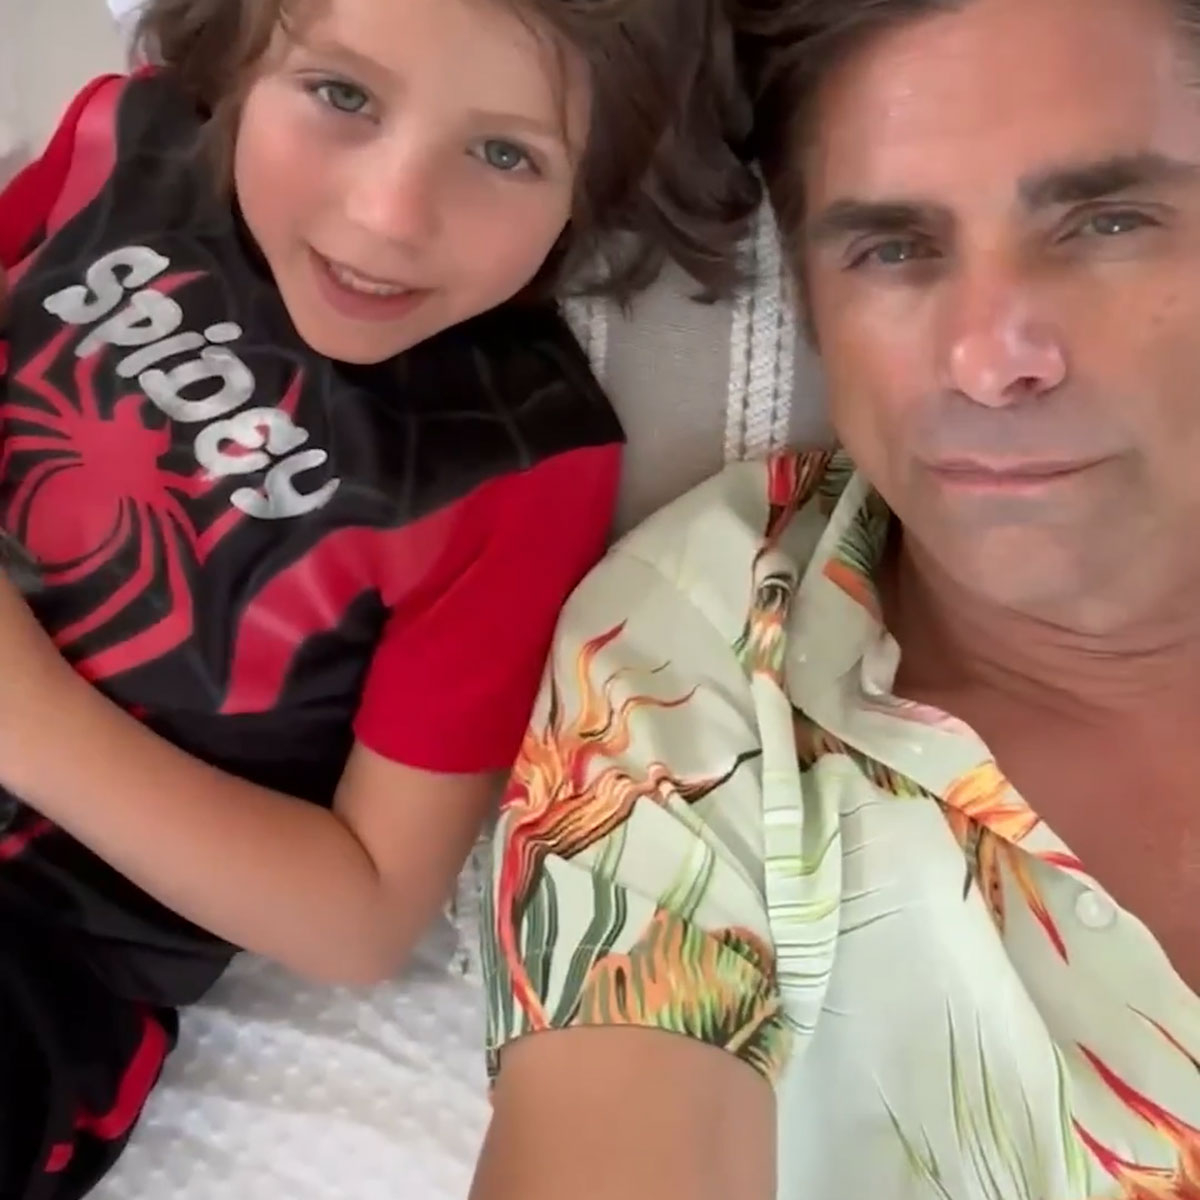 John Stamos Shares Adorable Video With Son Billy on His 60th Birthday